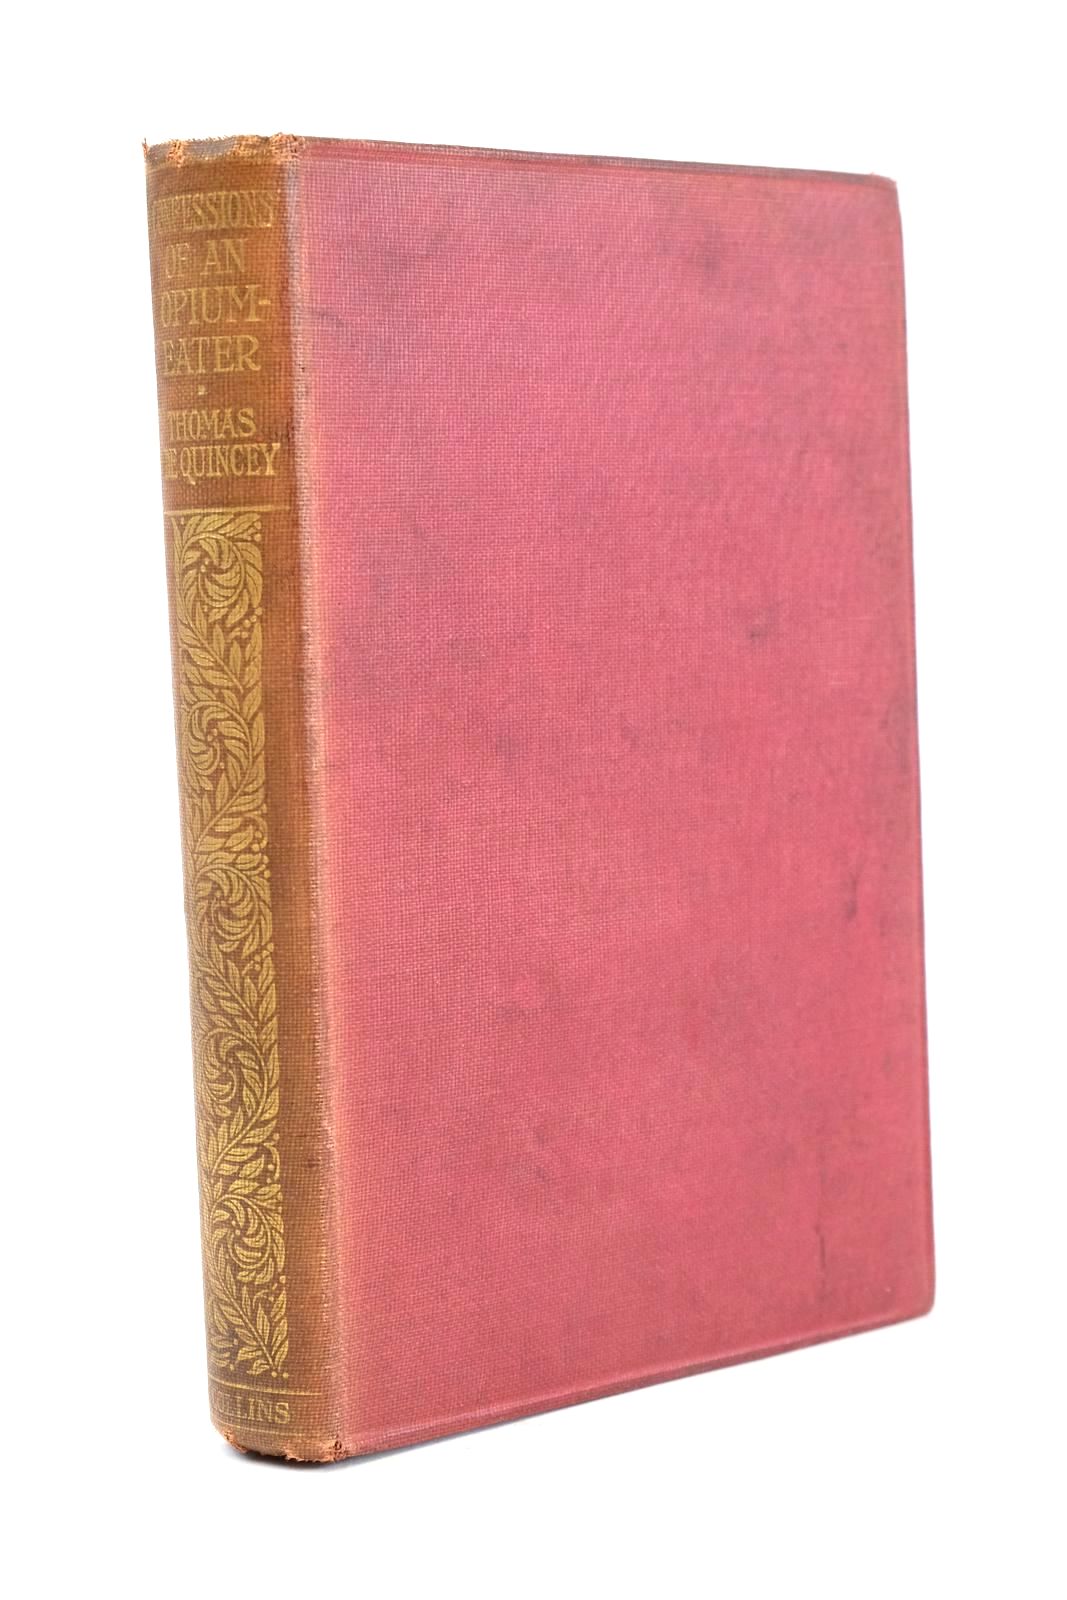 Photo of CONFESSIONS OF AN ENGLISH OPIUM-EATER- Stock Number: 1325171